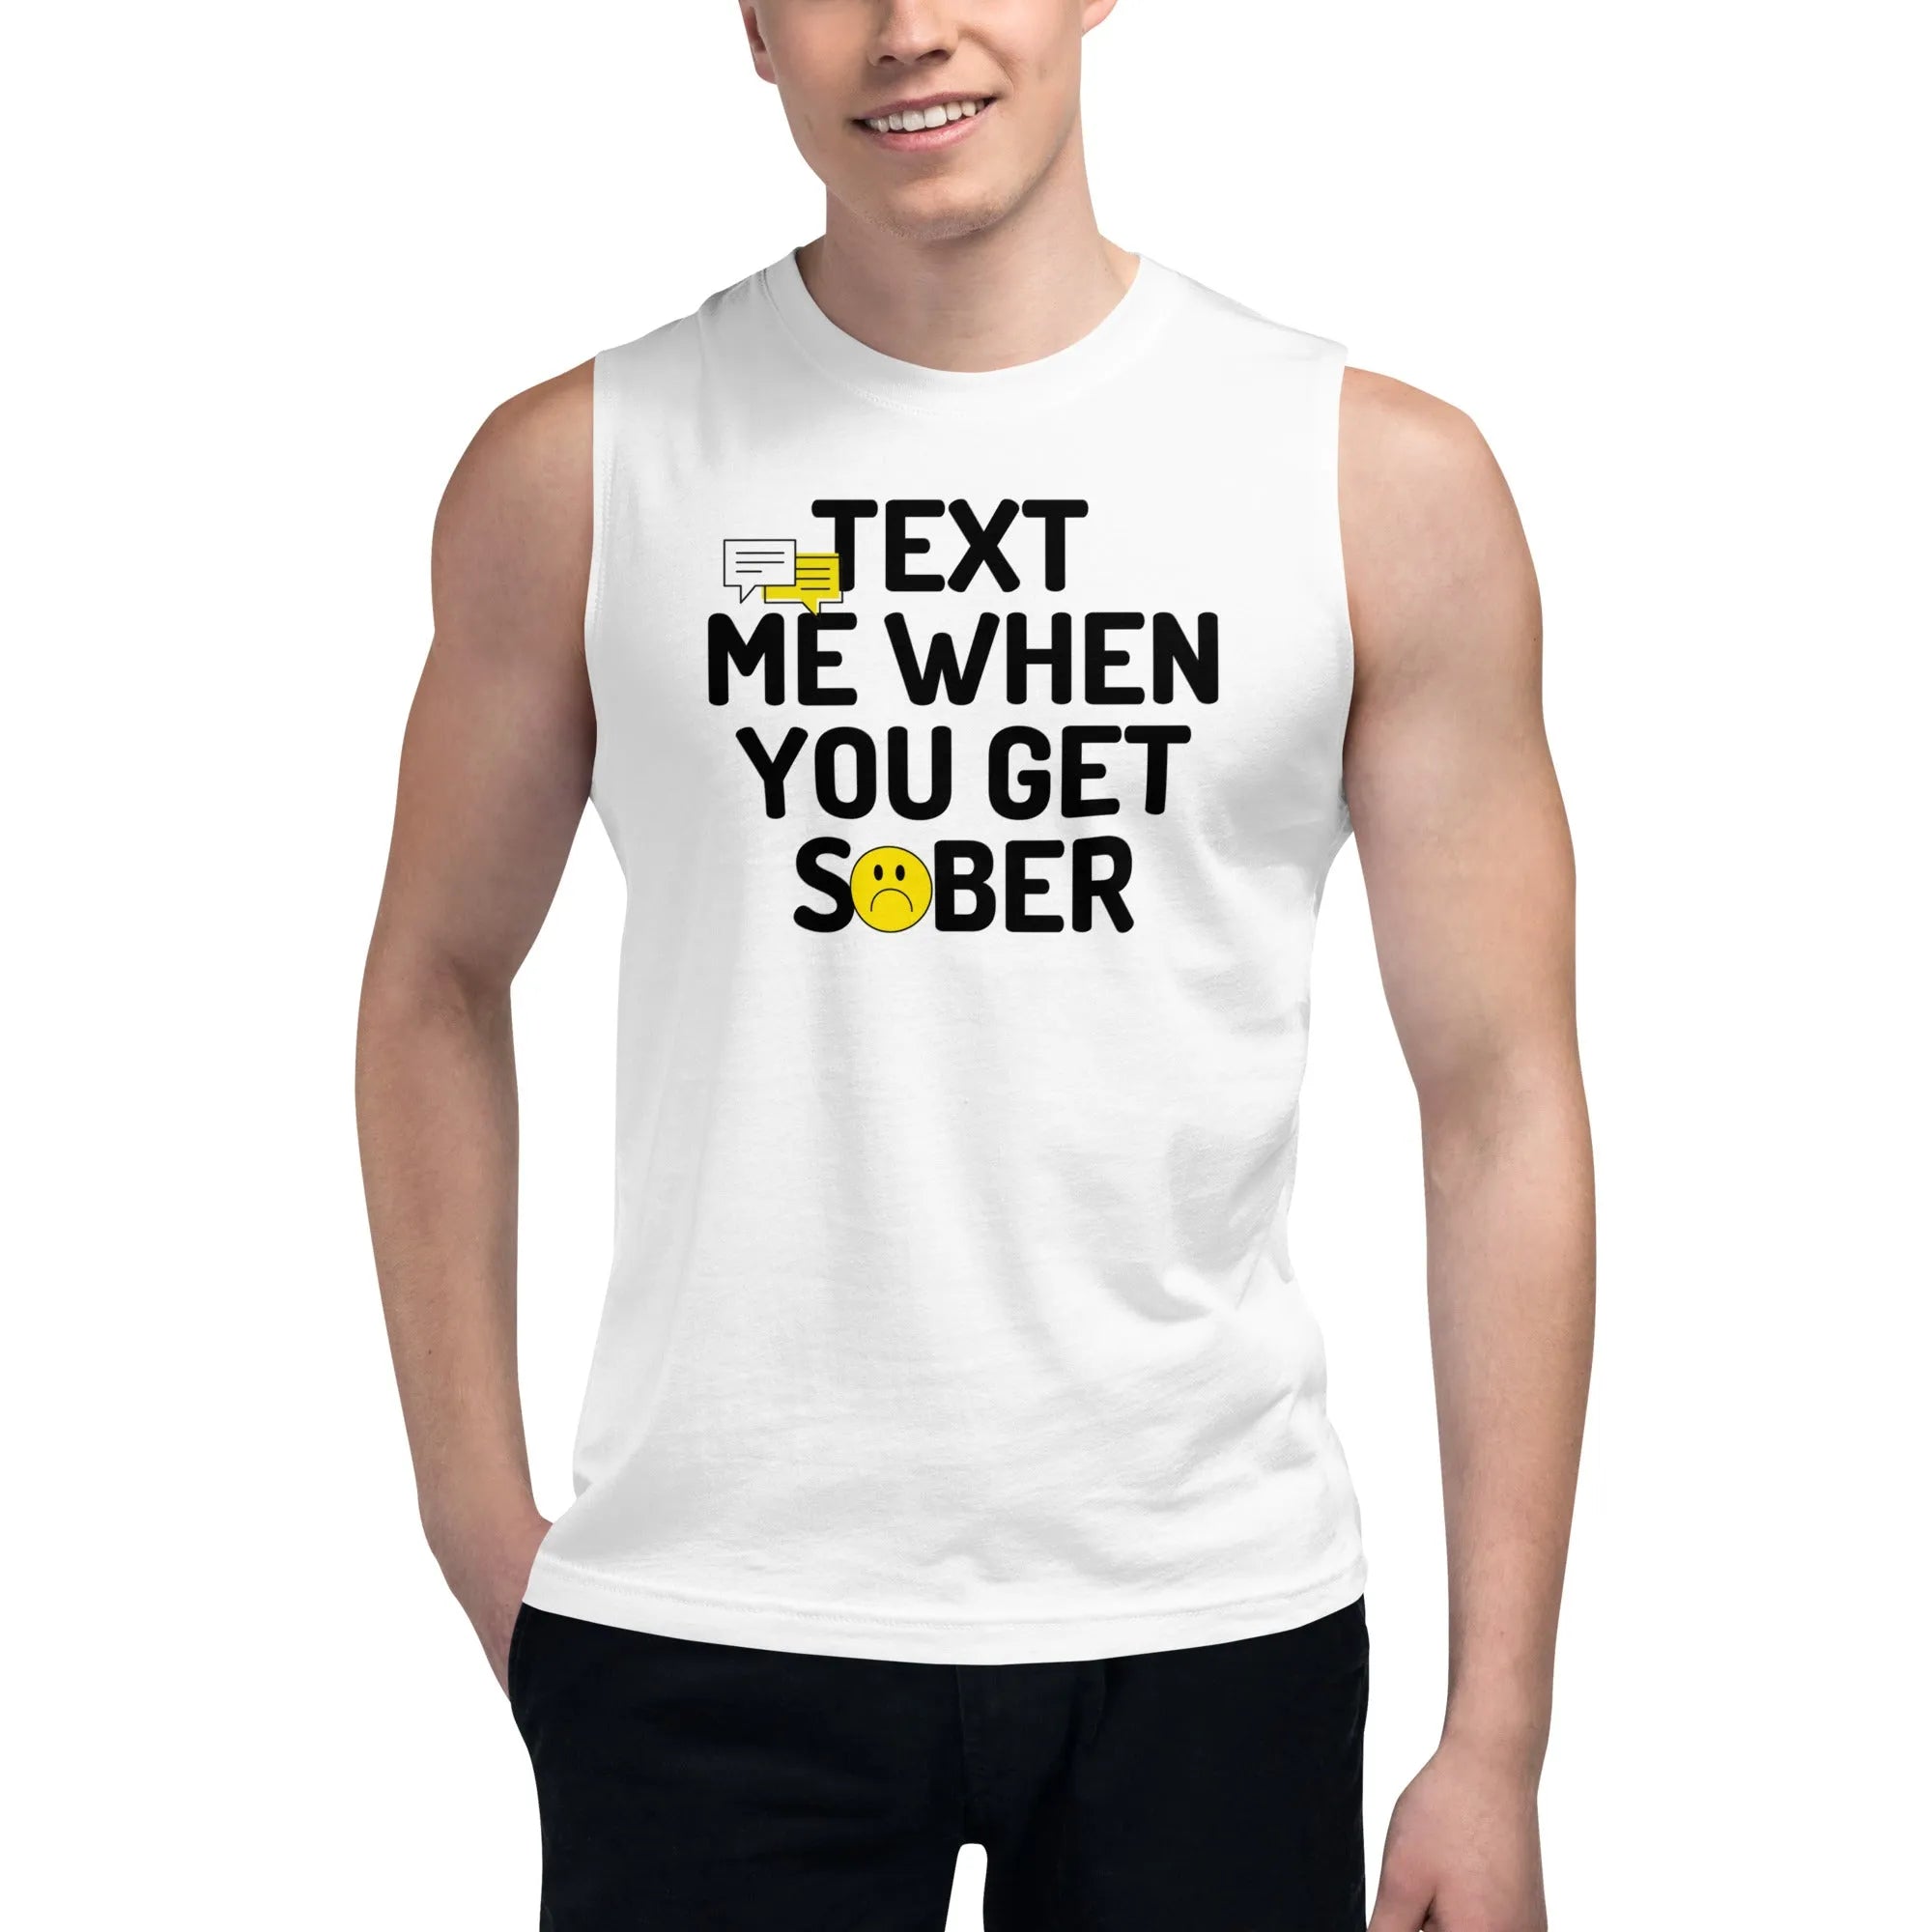 Text Me When You Get Sober - Muscle Shirt - Sobervation